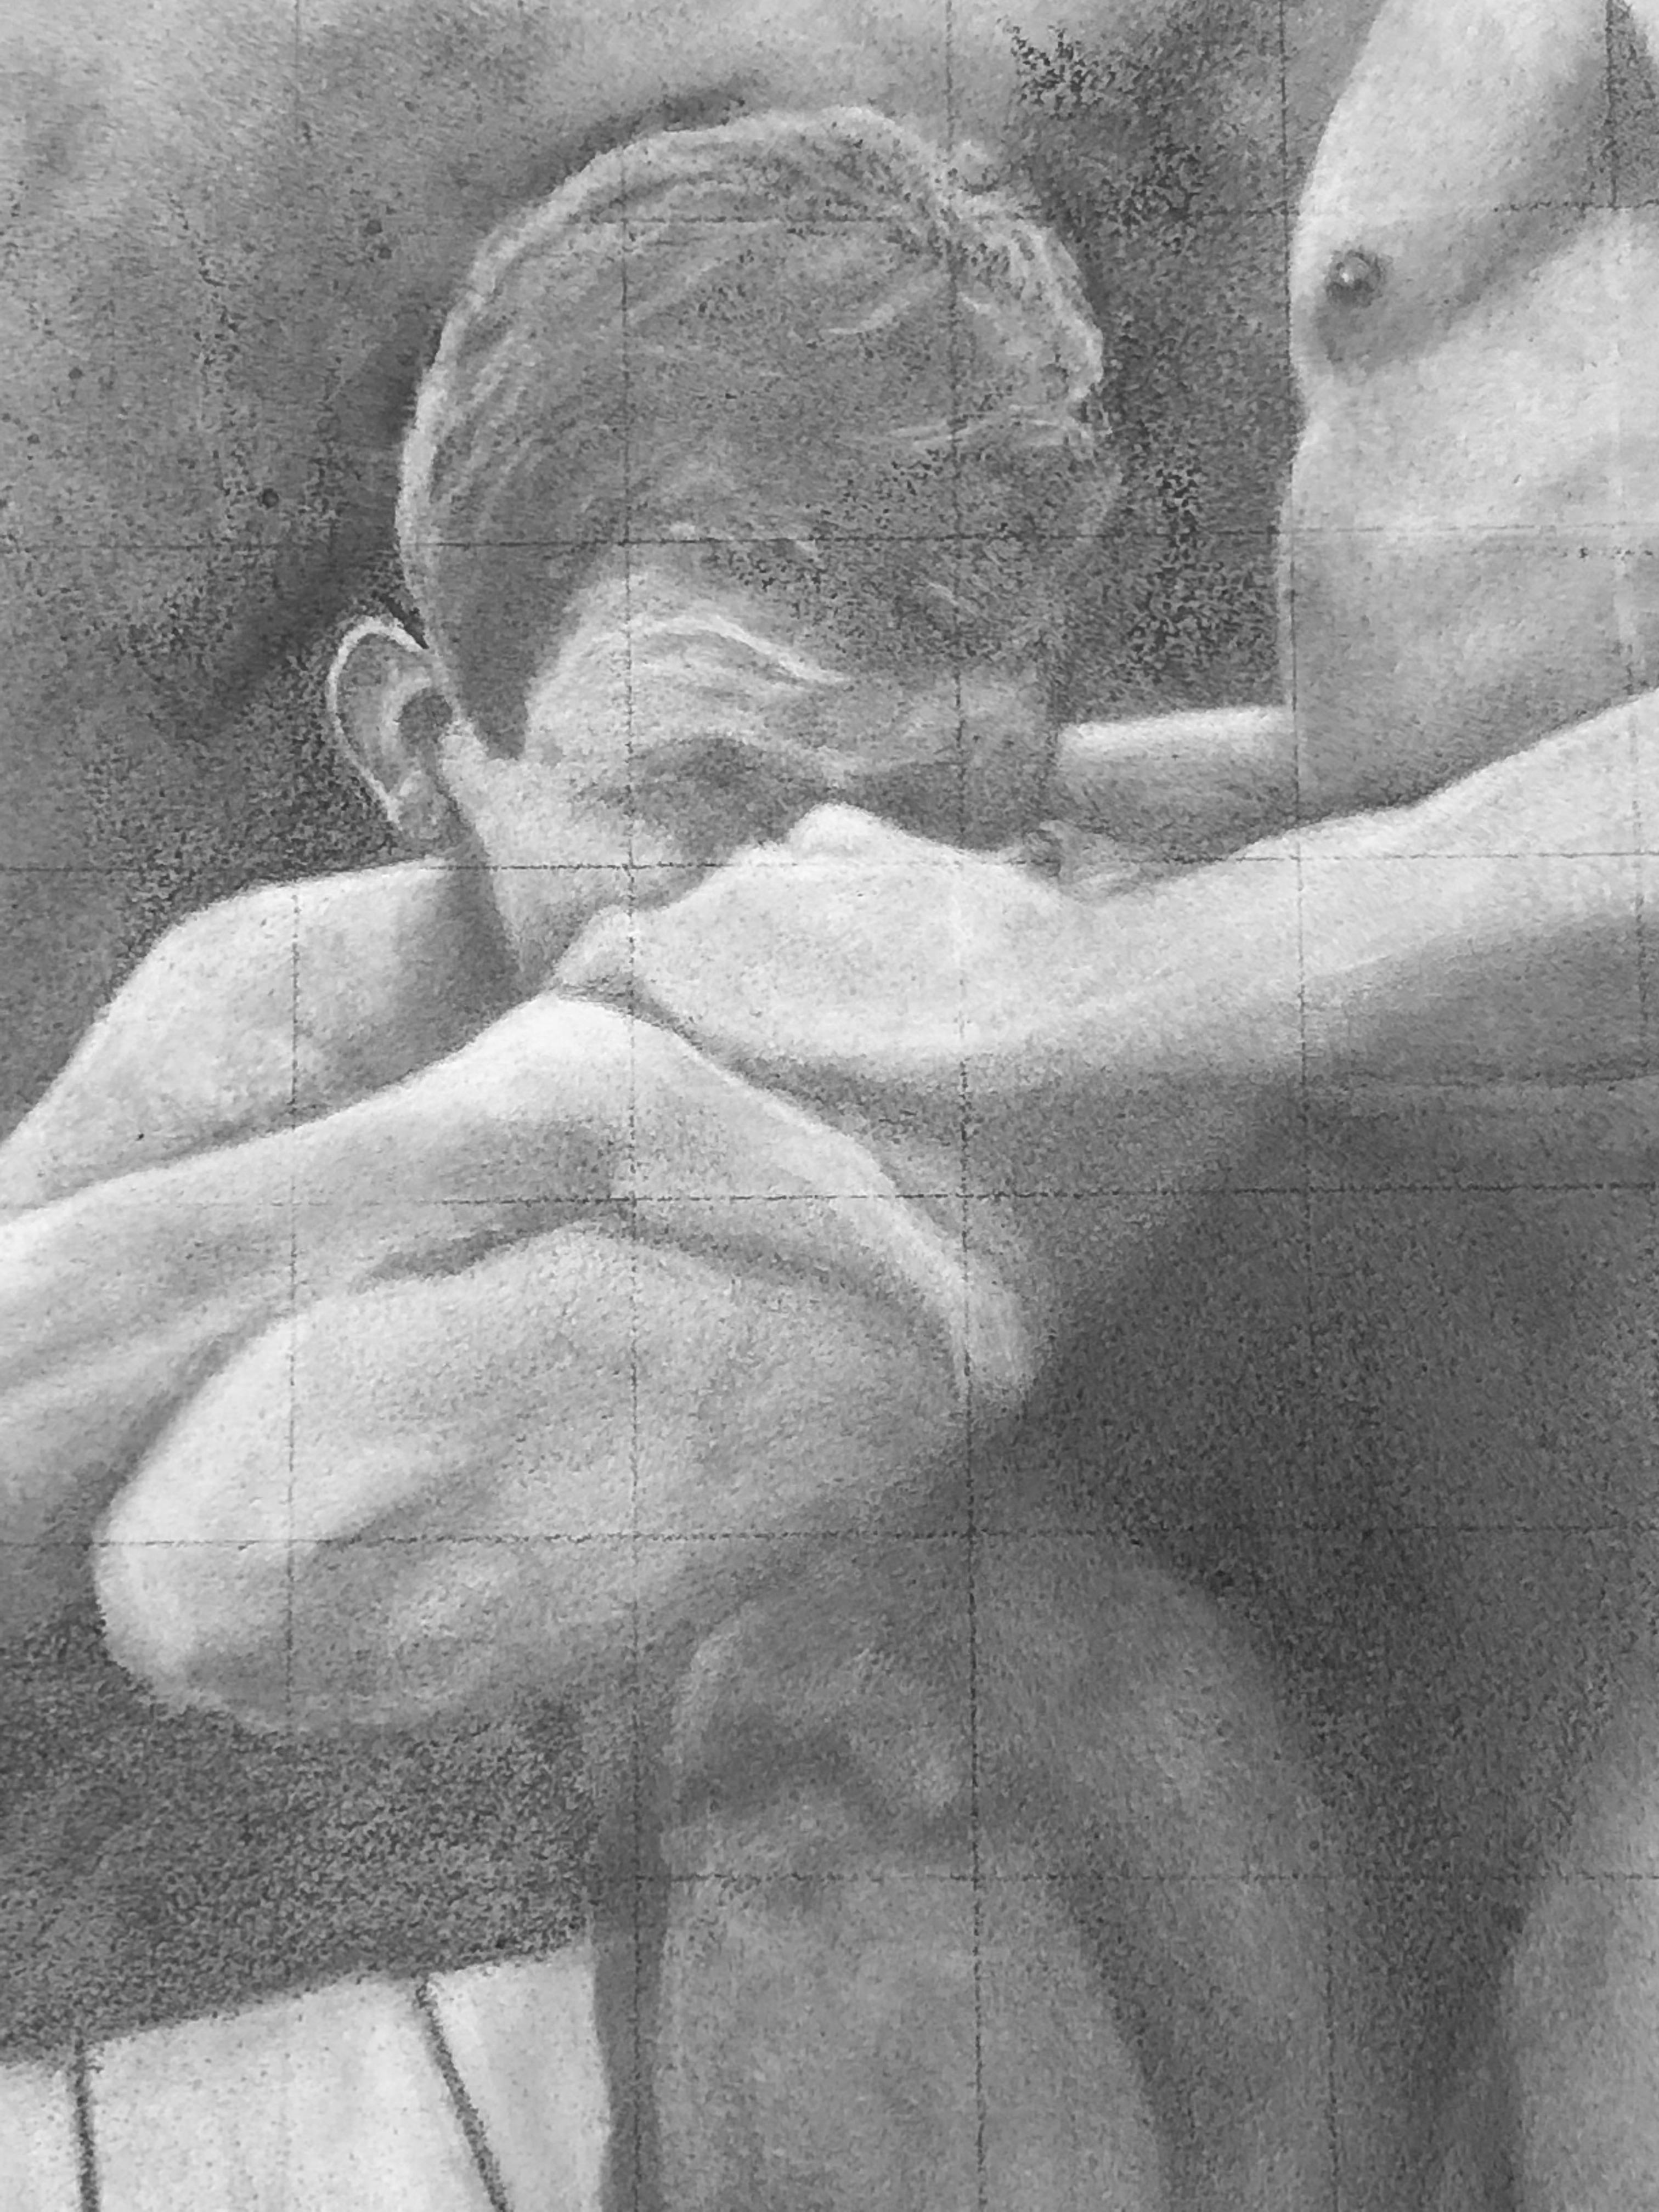 Untitled - After Cadmus - Nude Males Embracing, Original Graphite Drawing - Contemporary Art by Rick Sindt